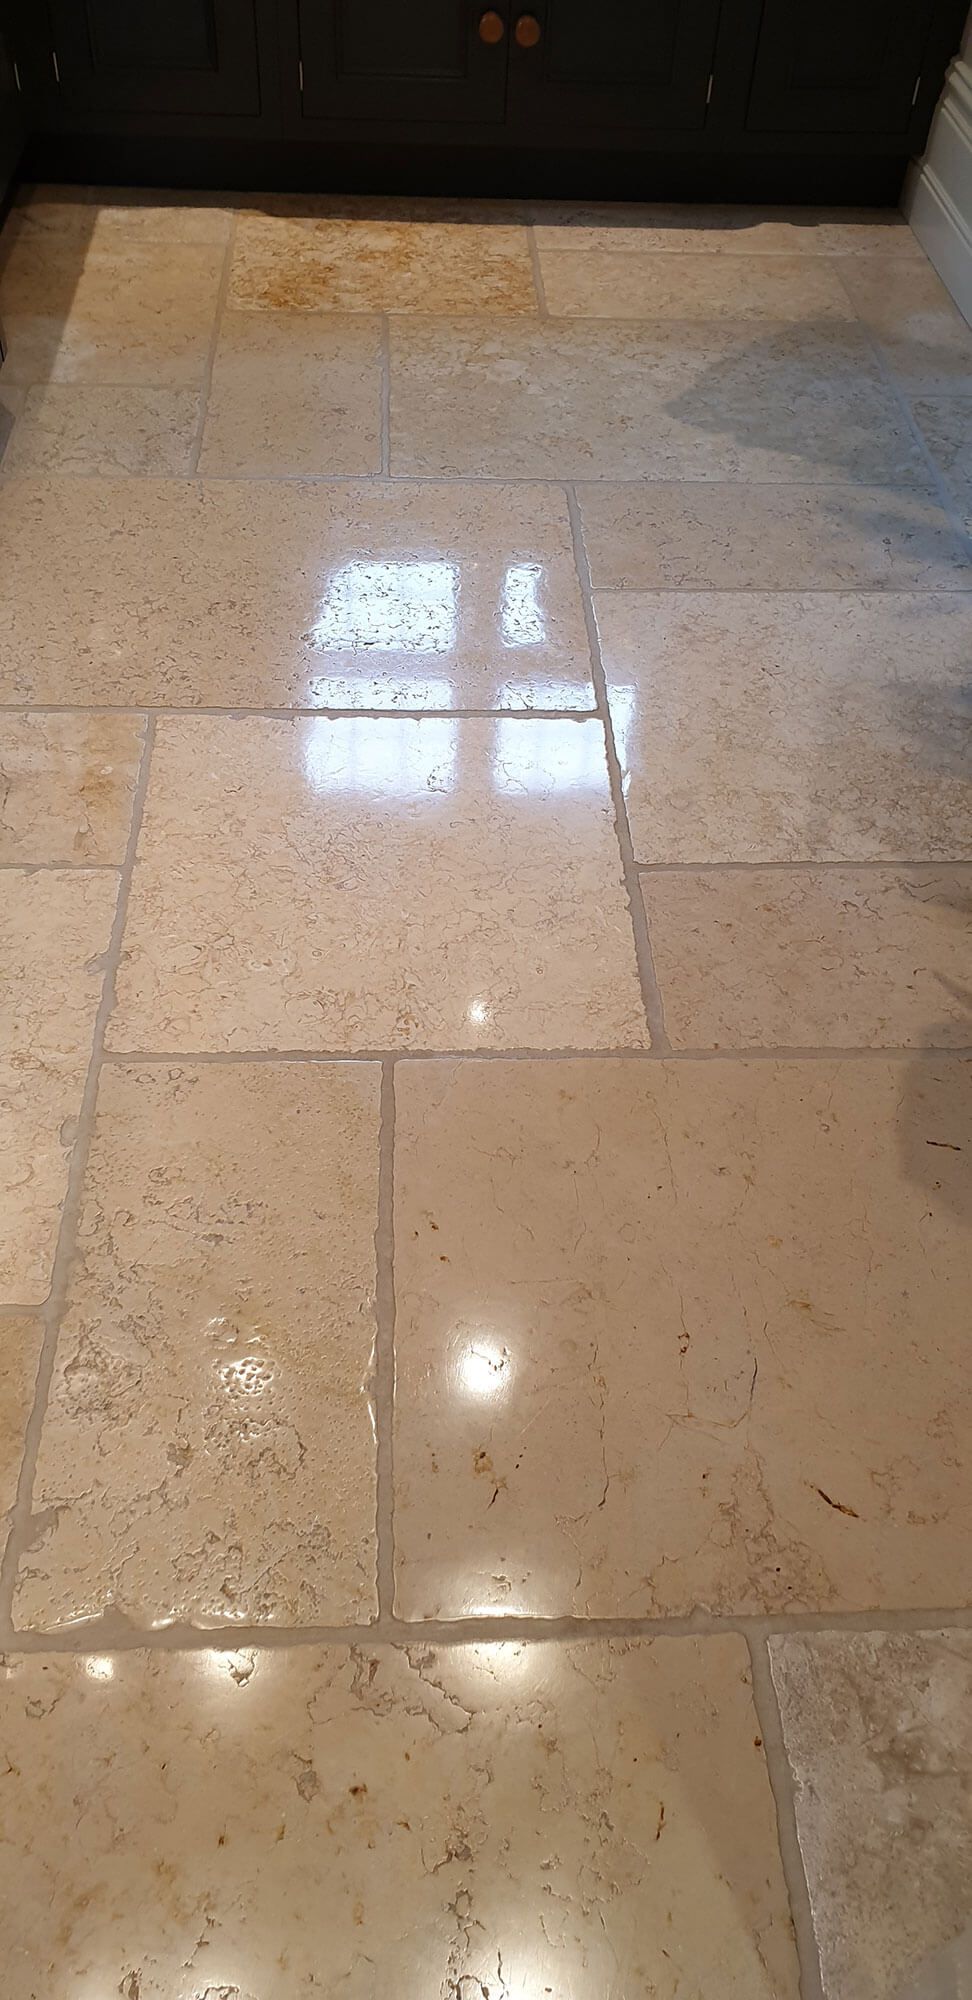 Slate floor before cleaning and after cleaning